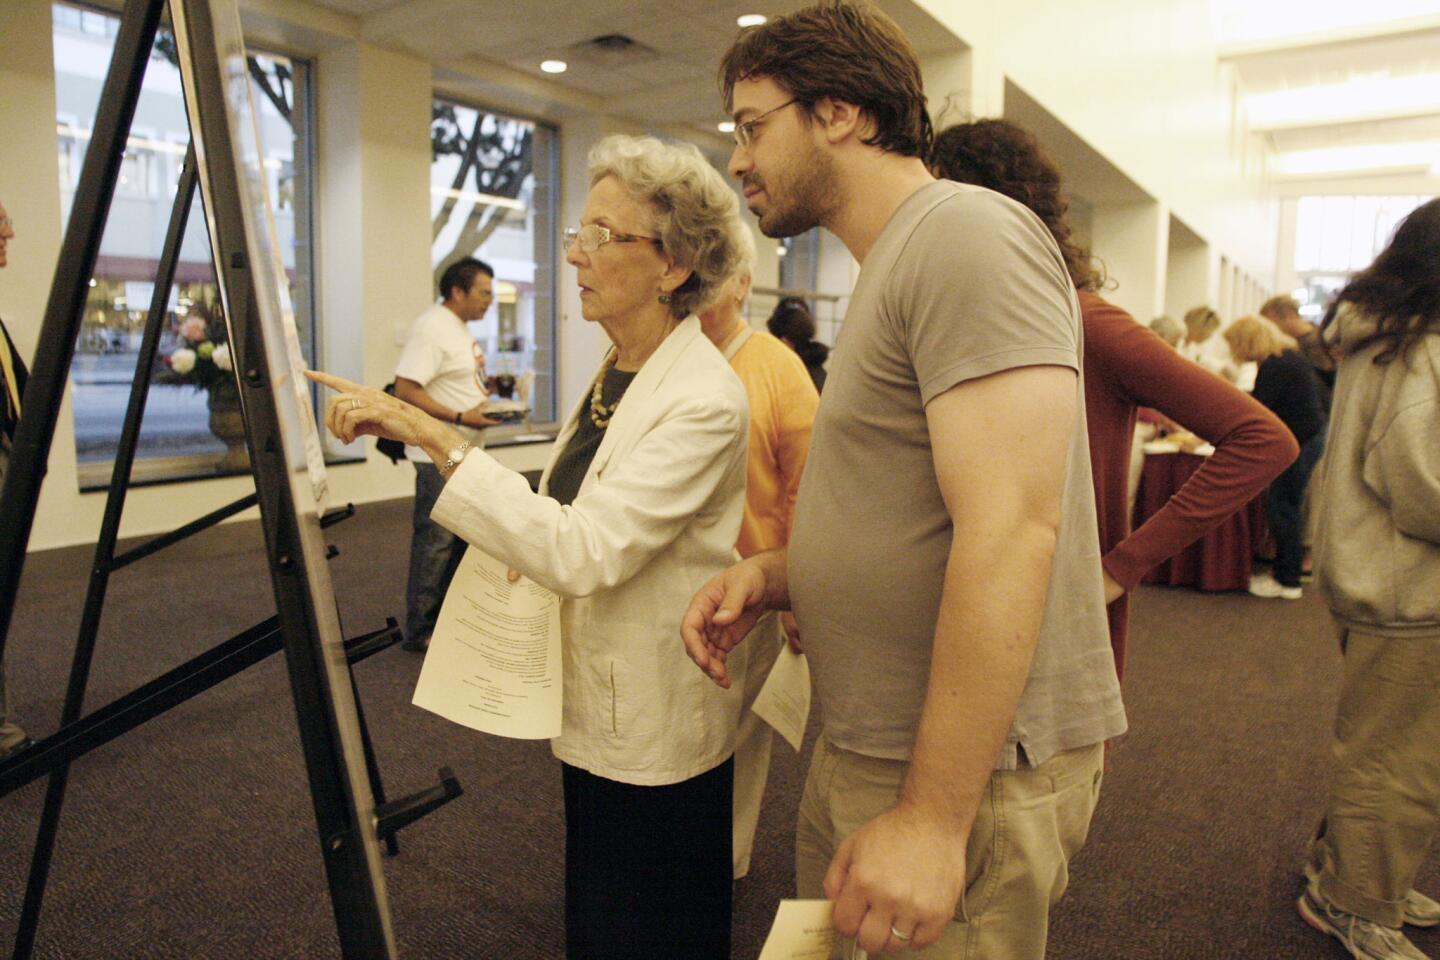 Connie Haddad, left, and Robert Granat put a sticker on a map during a panel discussion about the 710 freeway extension proposal, which took place at the Pasadena Convention Center on Tuesday, September 18, 2012.